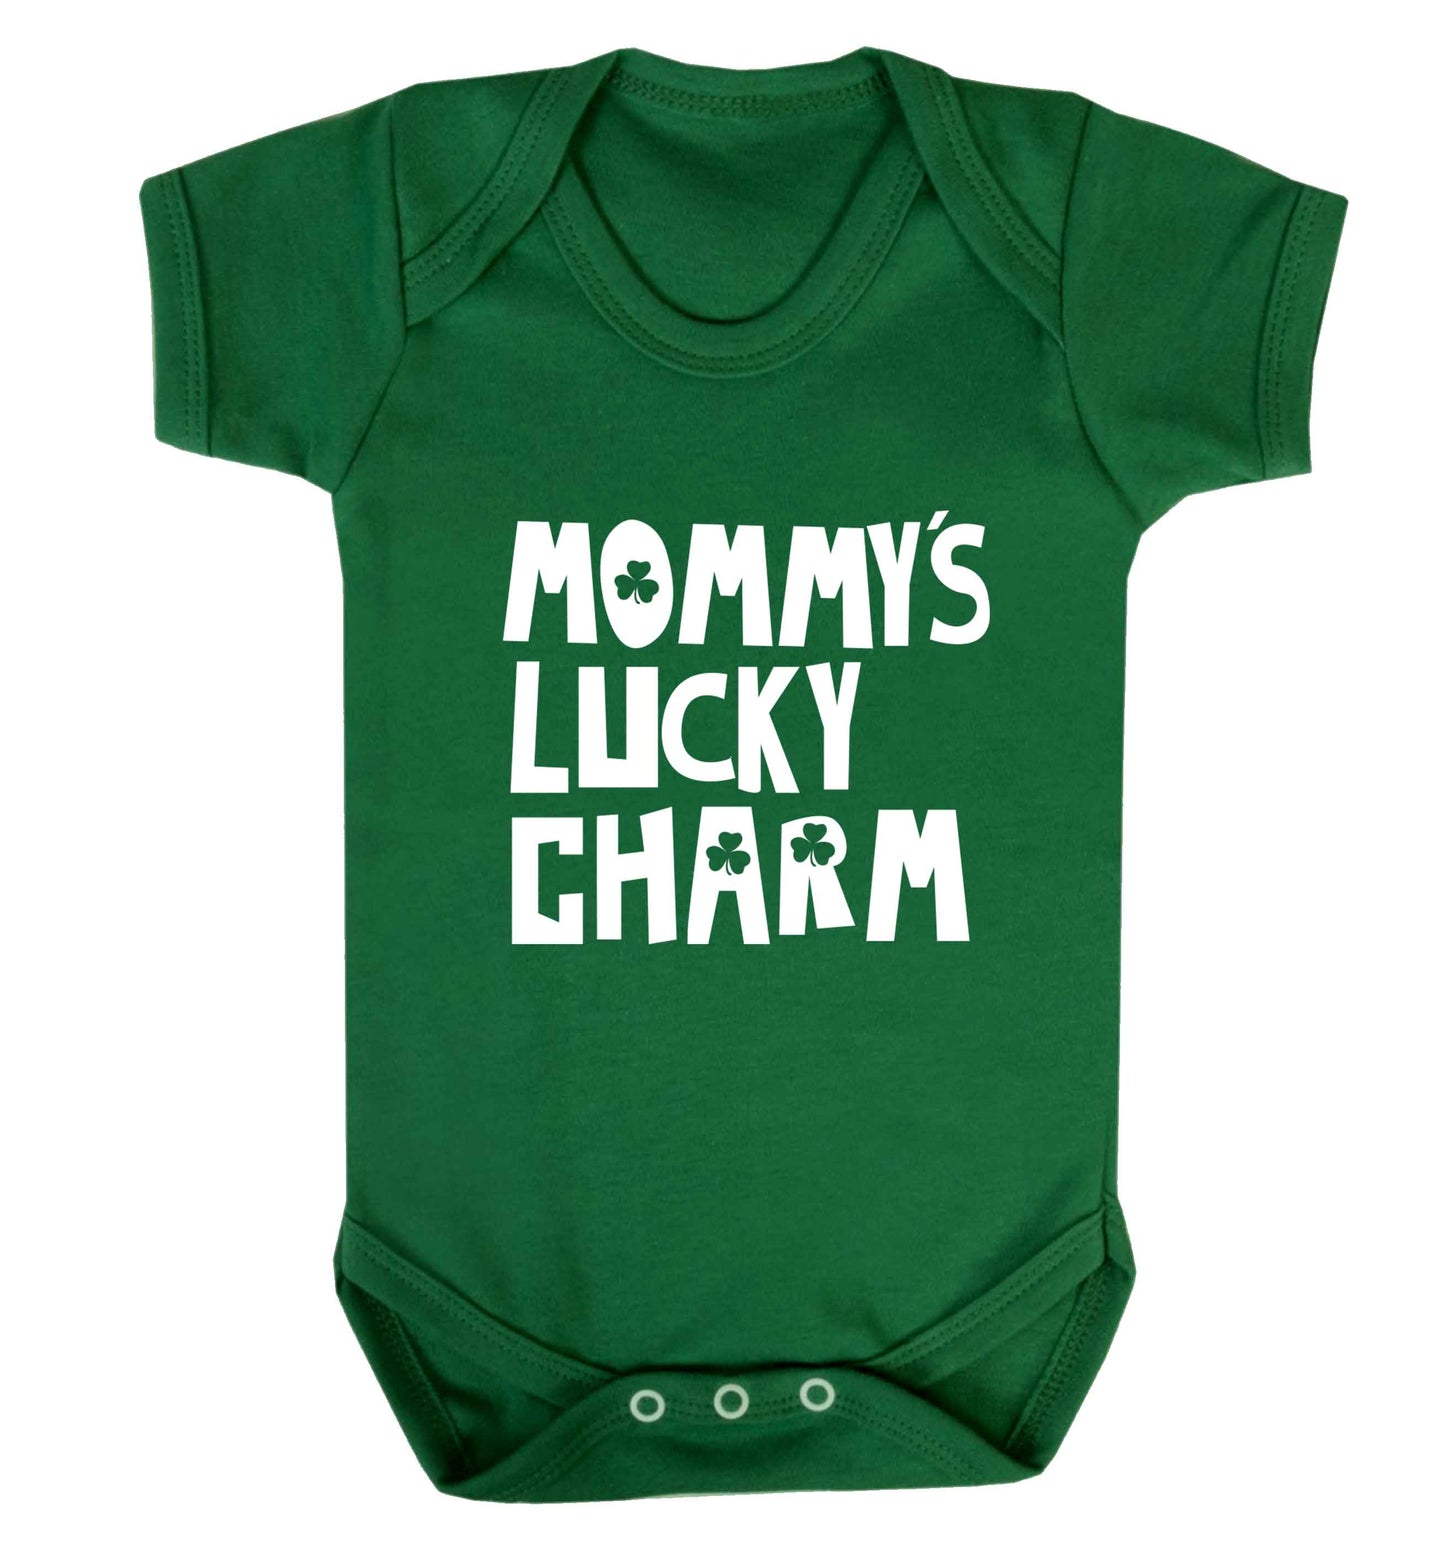 Mommy's lucky charm baby vest green 18-24 months